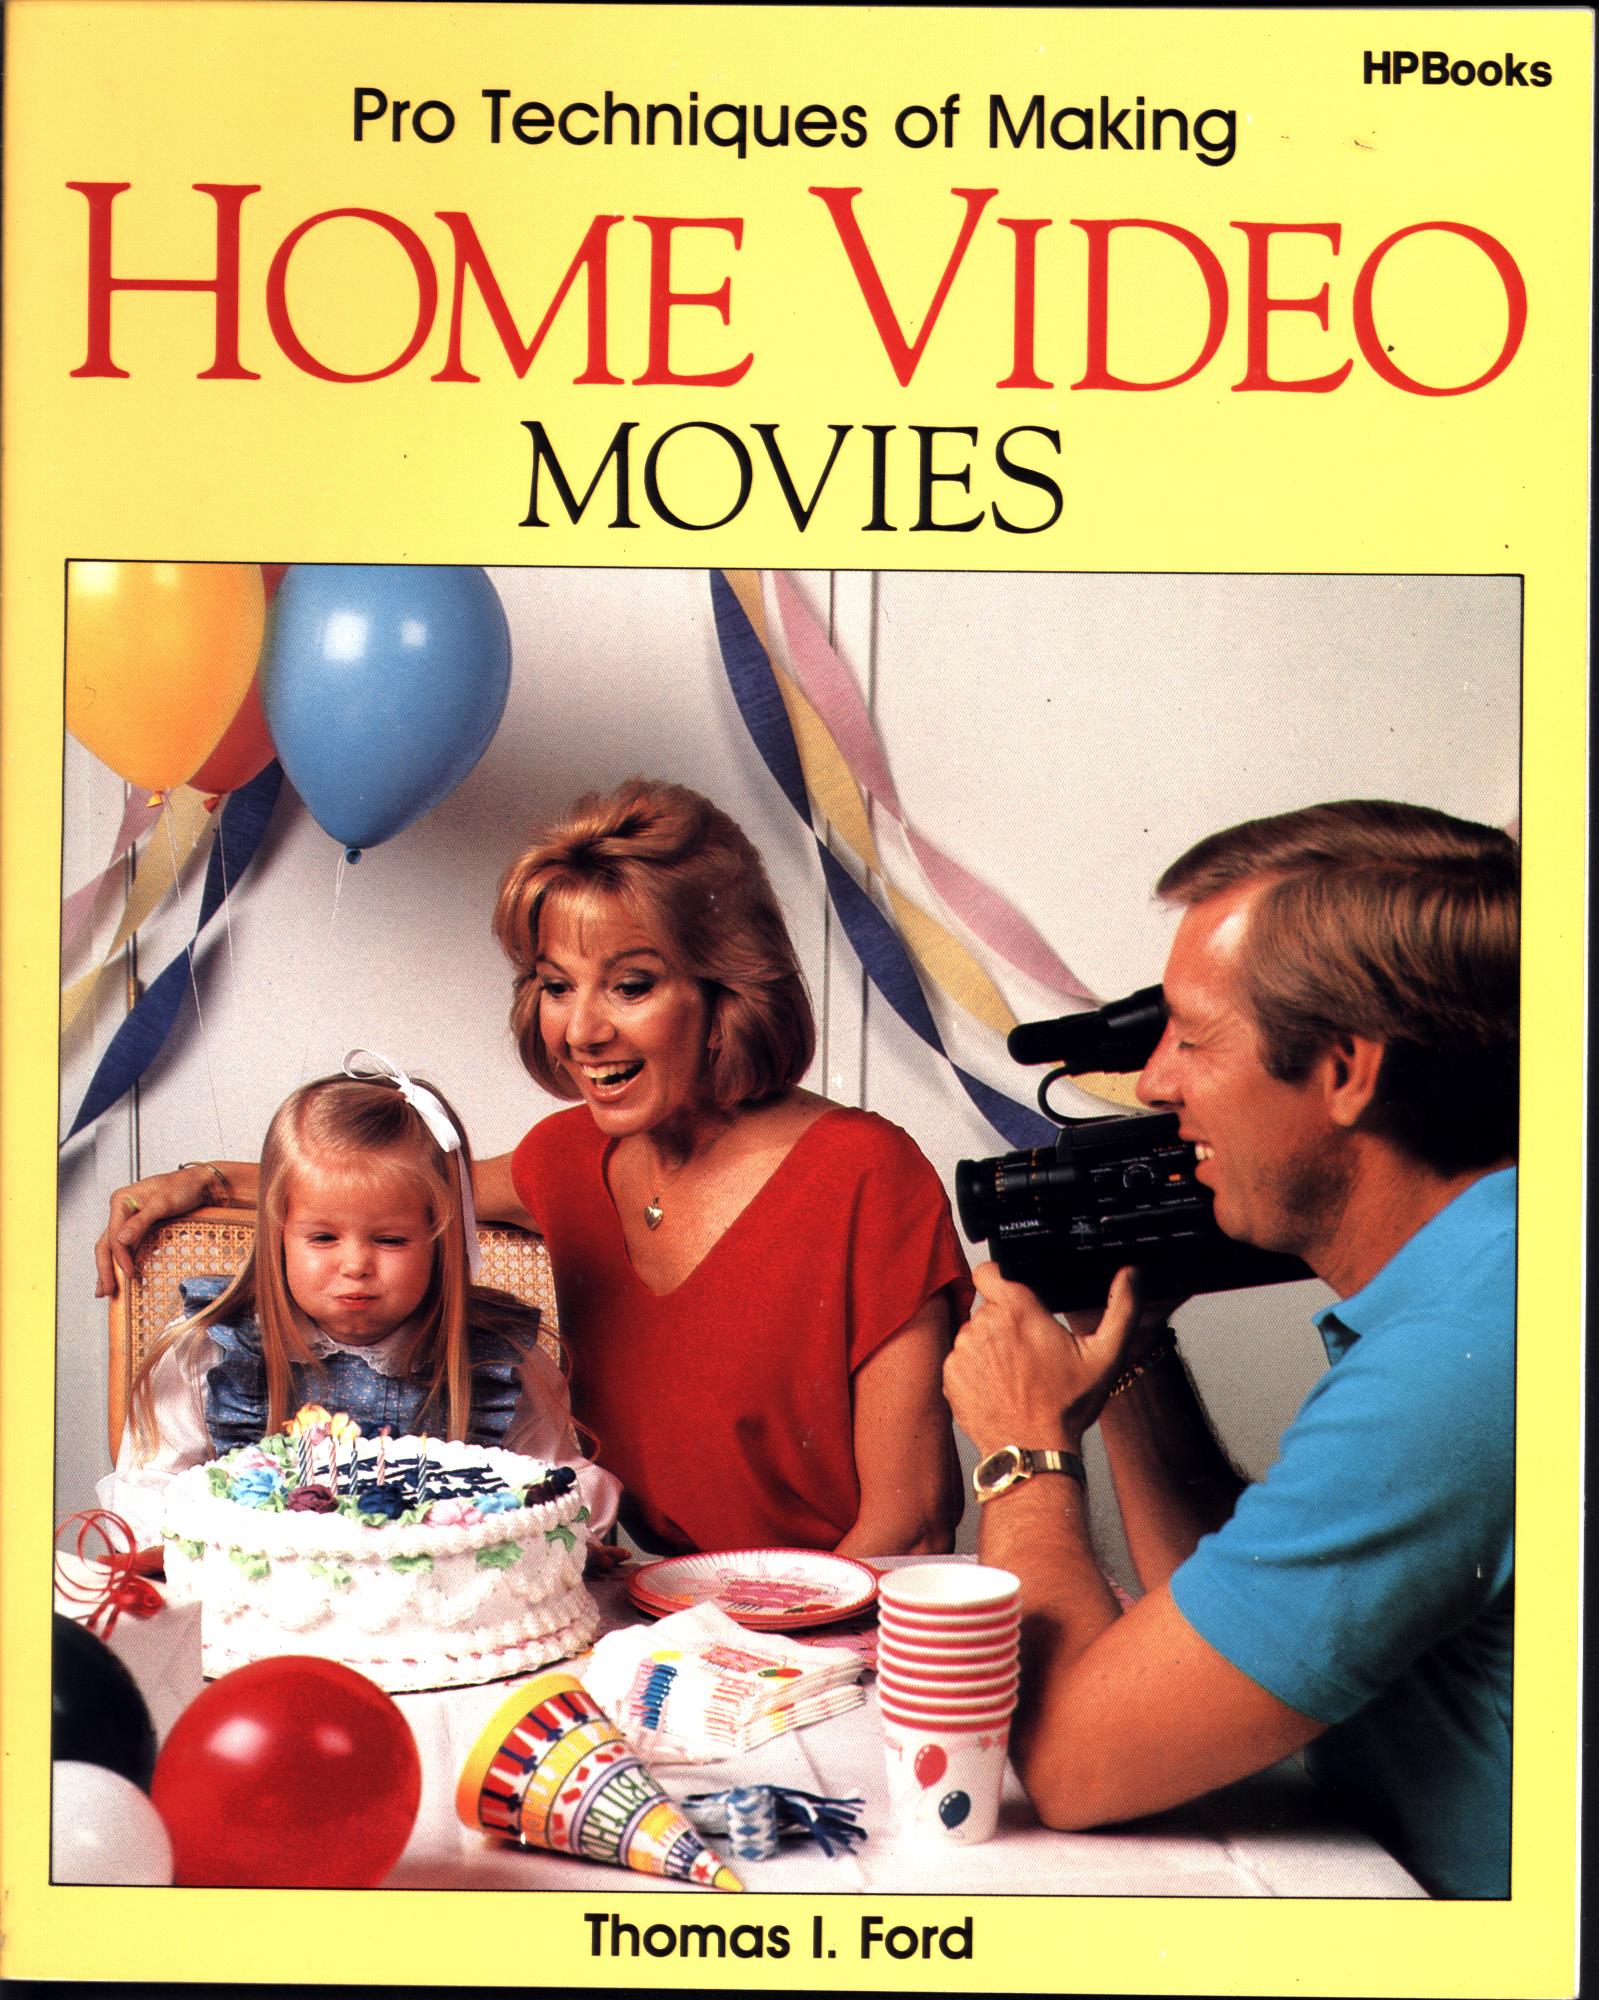 PRO TECHNIQUES OF MAKING HOME VIDEO MOVIES.